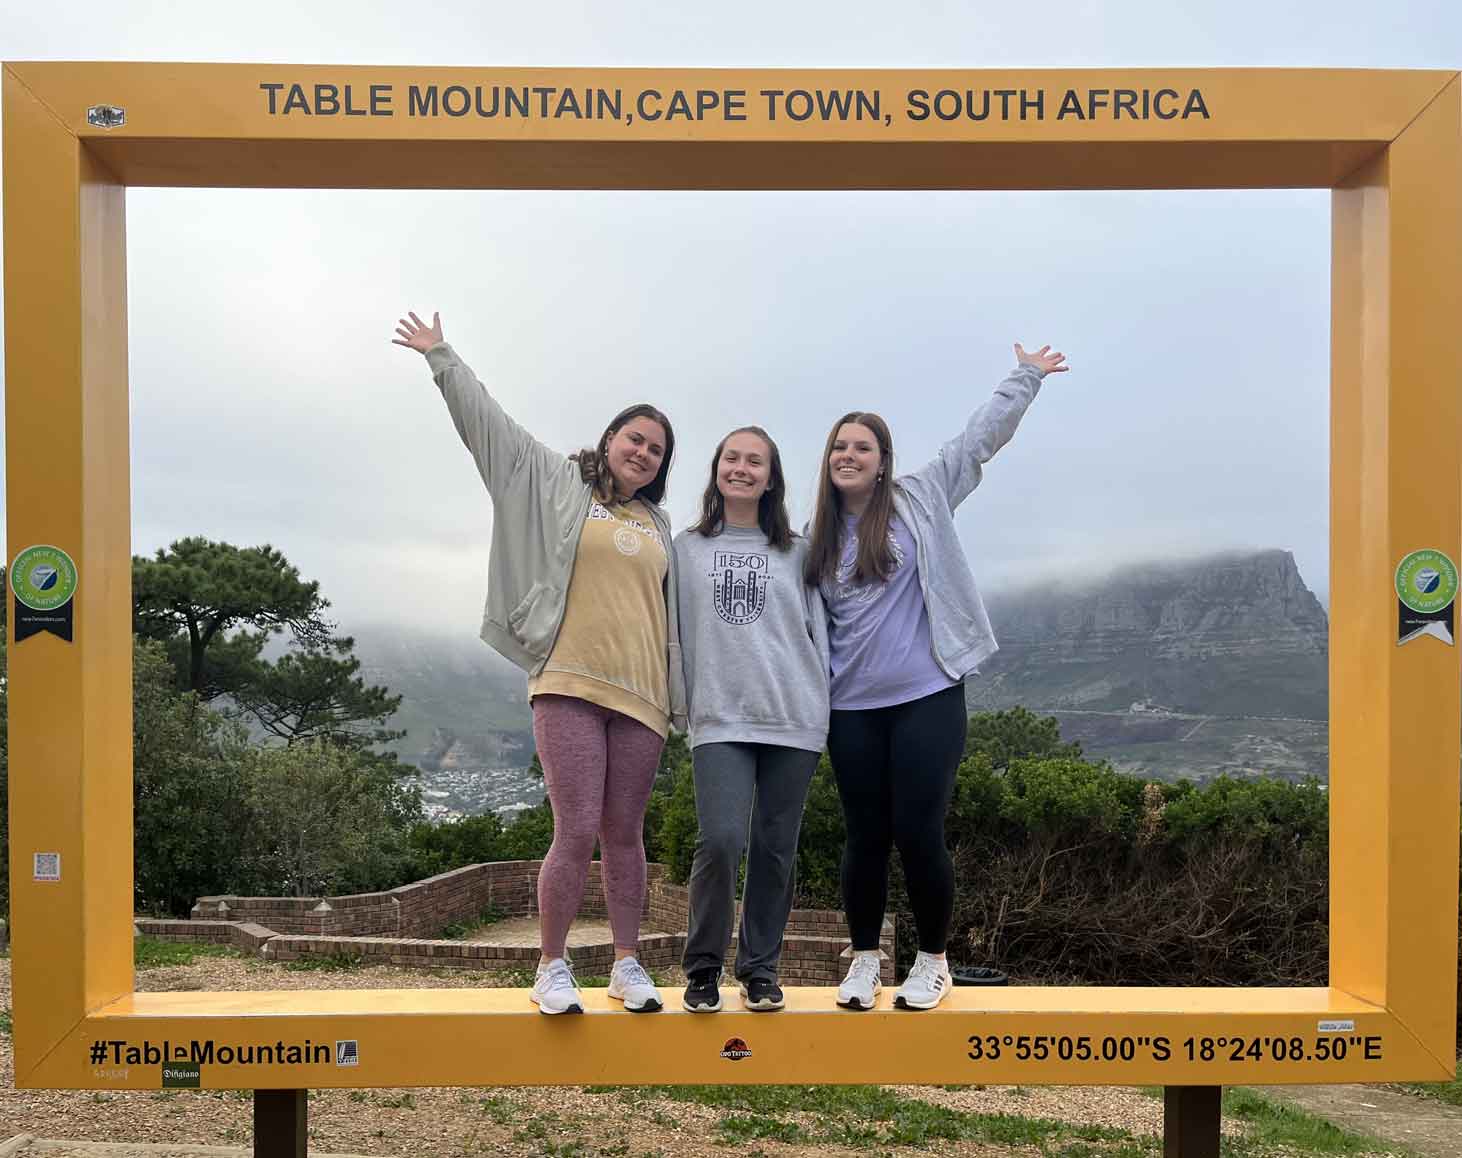 Group posing in the Table Mountain square